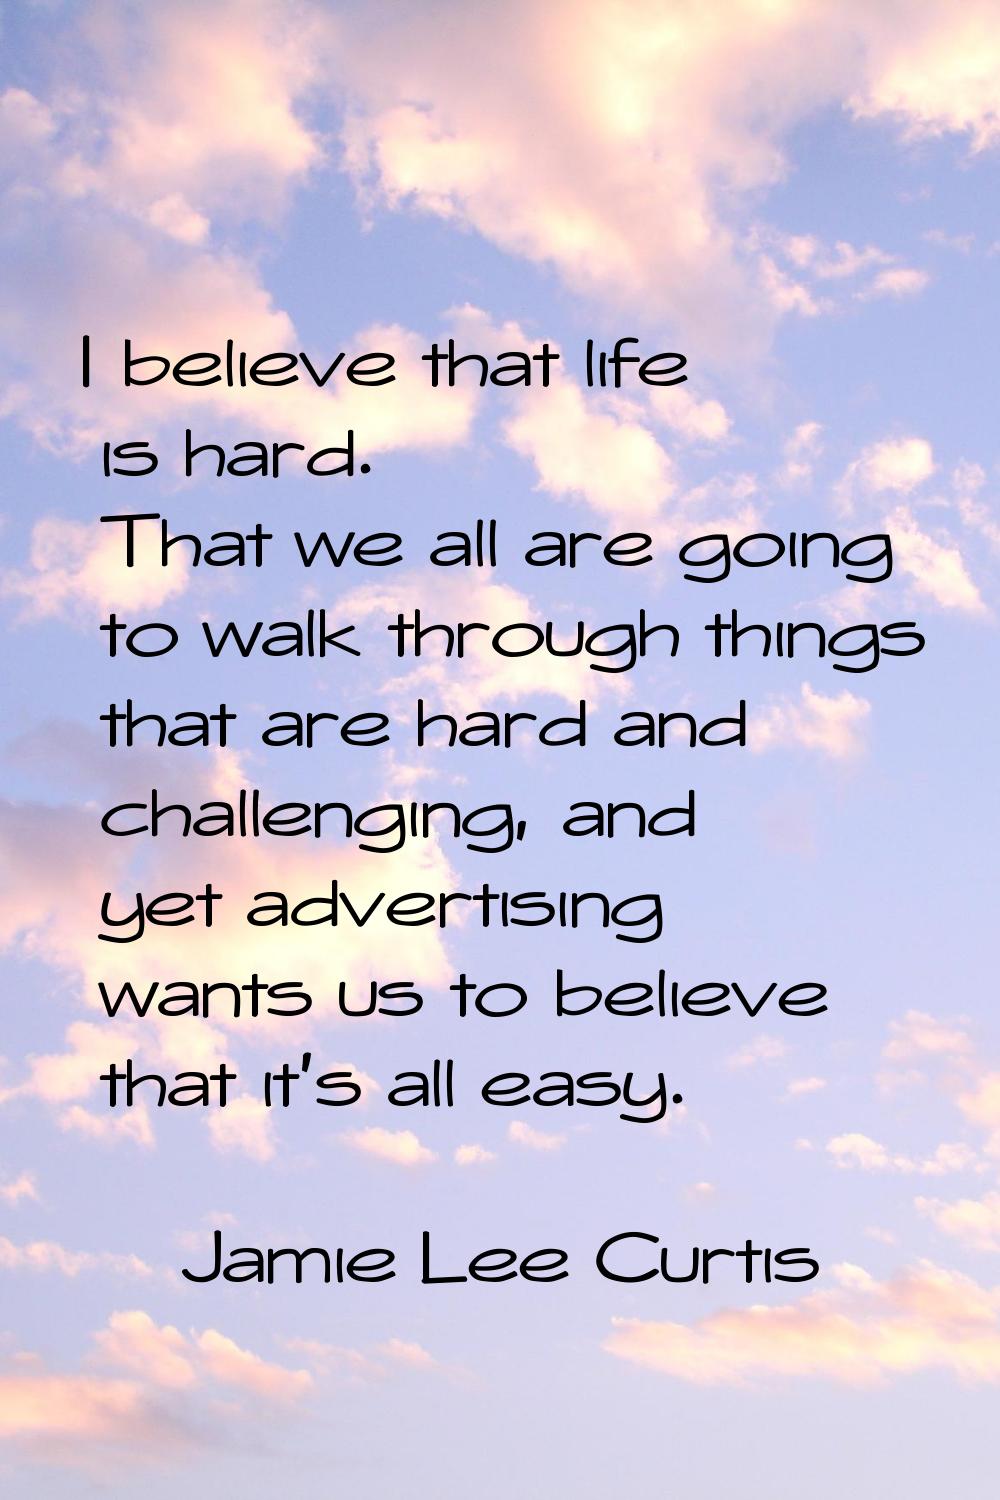 I believe that life is hard. That we all are going to walk through things that are hard and challen